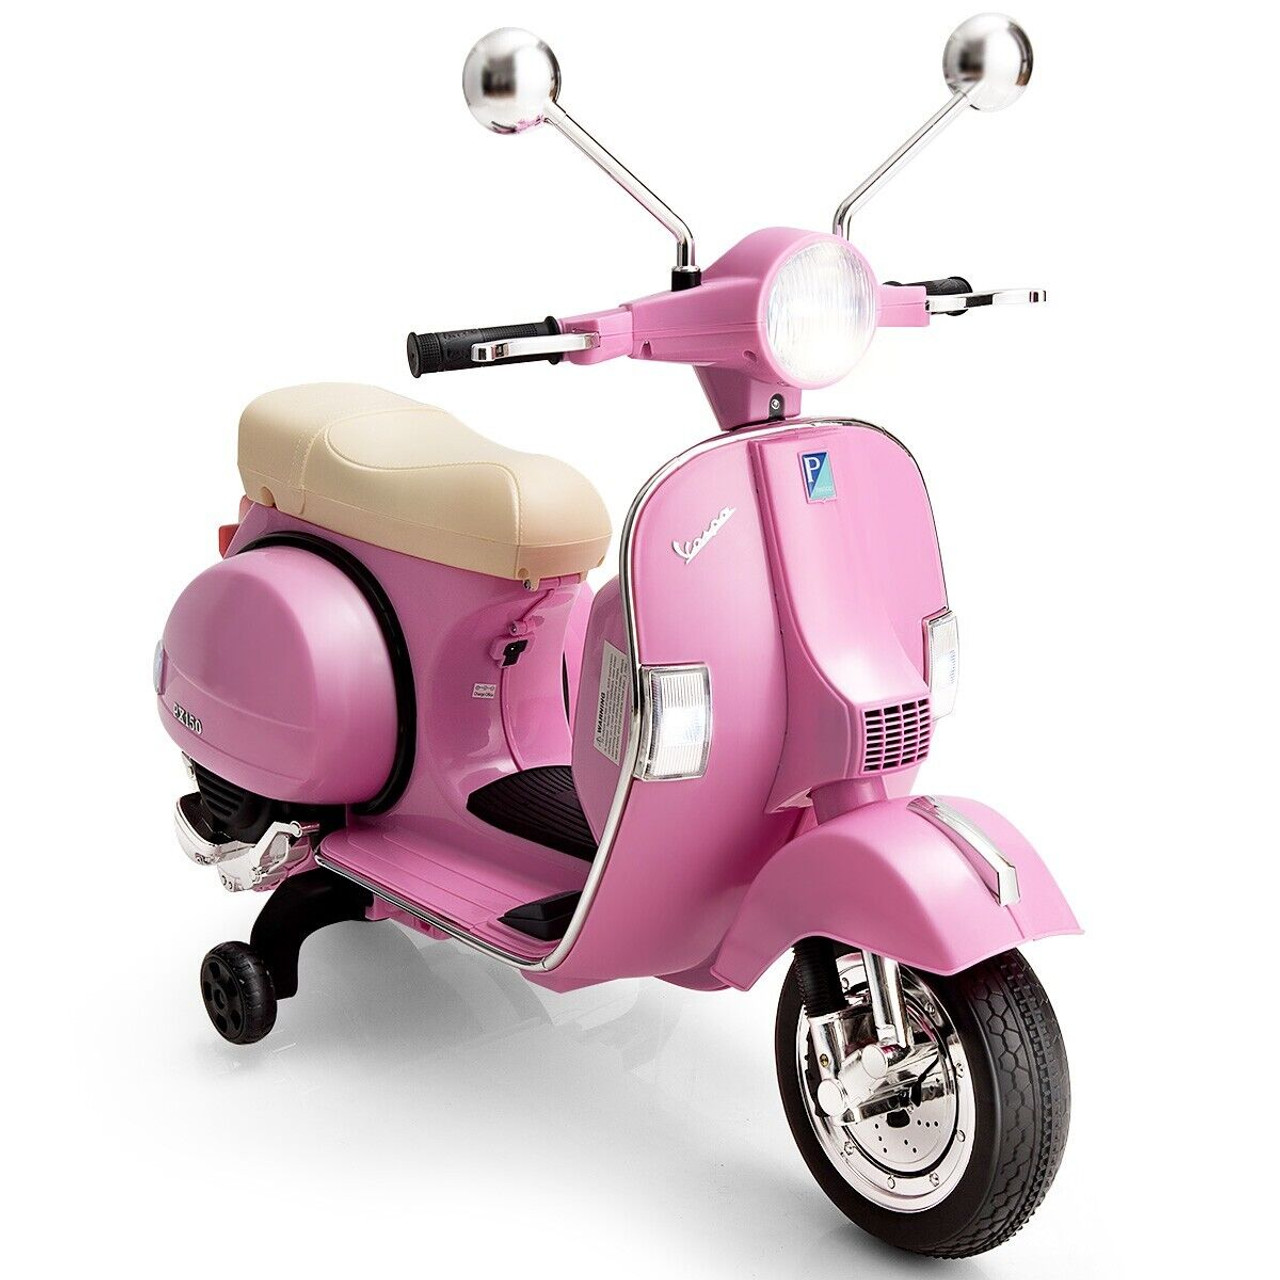 https://cdn11.bigcommerce.com/s-f6pct9vuuz/images/stencil/1280x1280/products/521/3925/Girls_Pink_Official_Piaggio_Vespa_Retro_Electric_Kids_Moped__54945.1677763076.jpg?c=1